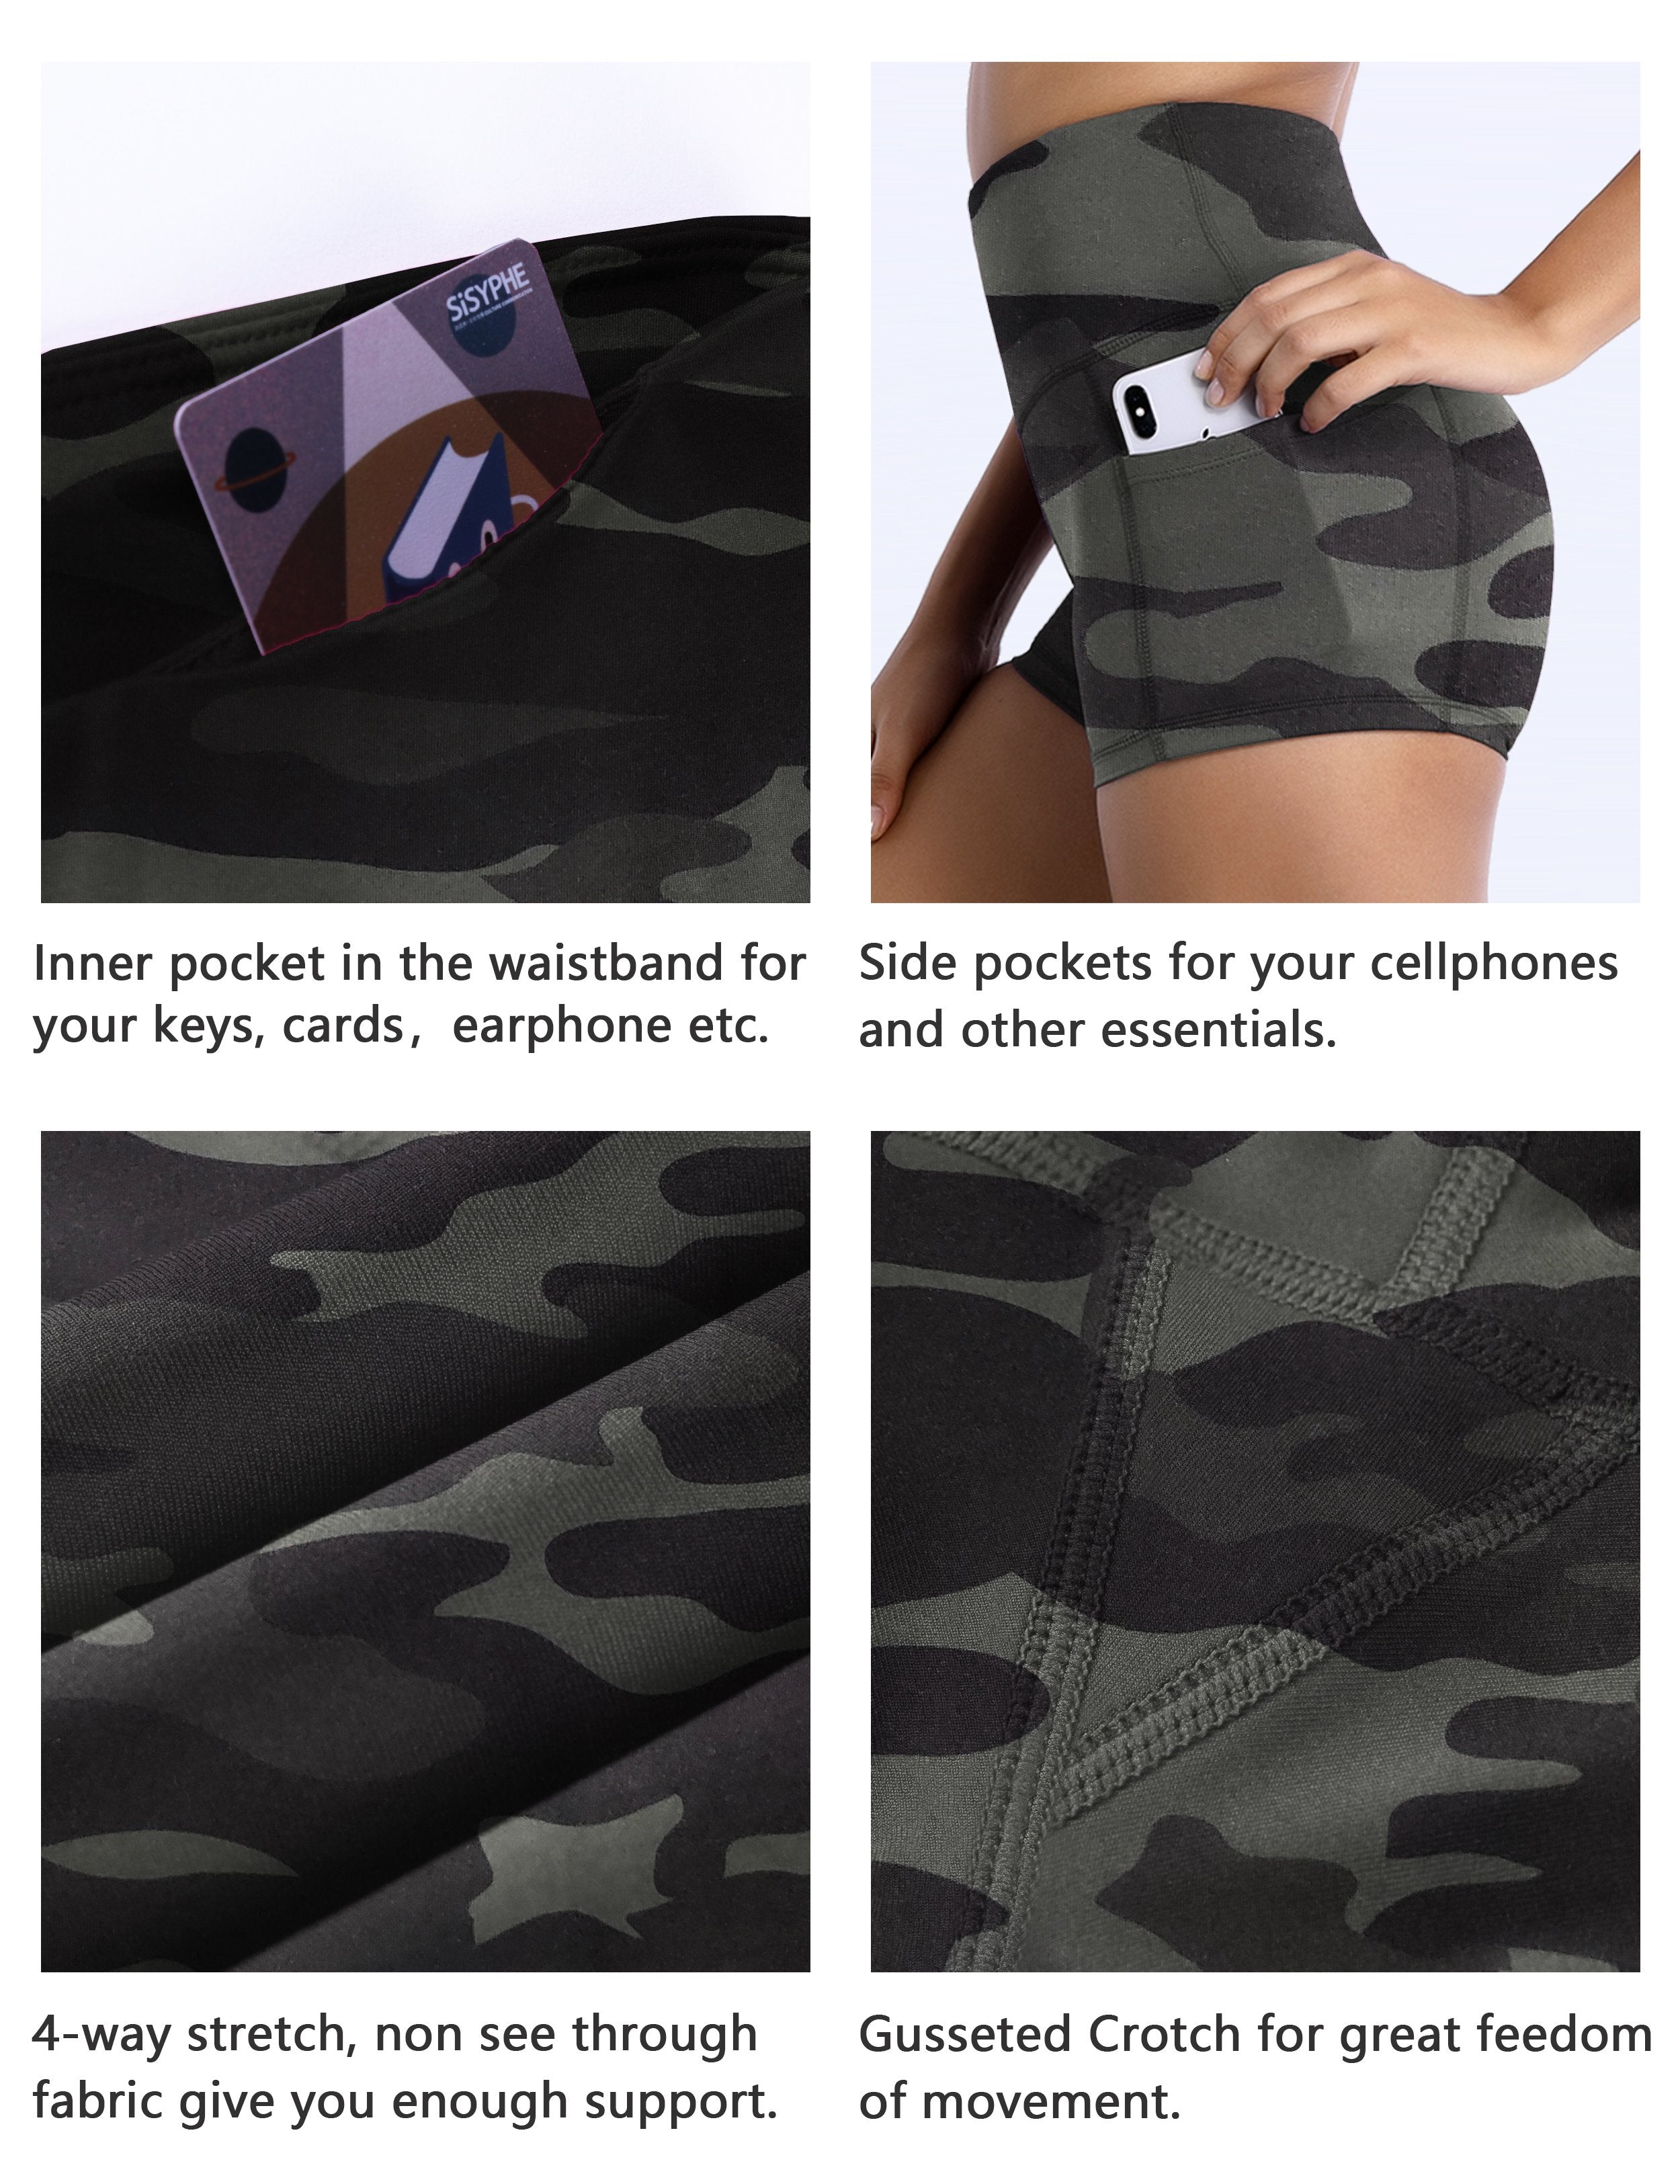 2.5" Printed Side Pockets Jogging Shorts dimgraycamo Sleek, soft, smooth and totally comfortable: our newest sexy style is here. Softest-ever fabric High elasticity High density 4-way stretch Fabric doesn't attract lint easily No see-through Moisture-wicking Machine wash 78% Polyester, 22% Spandex